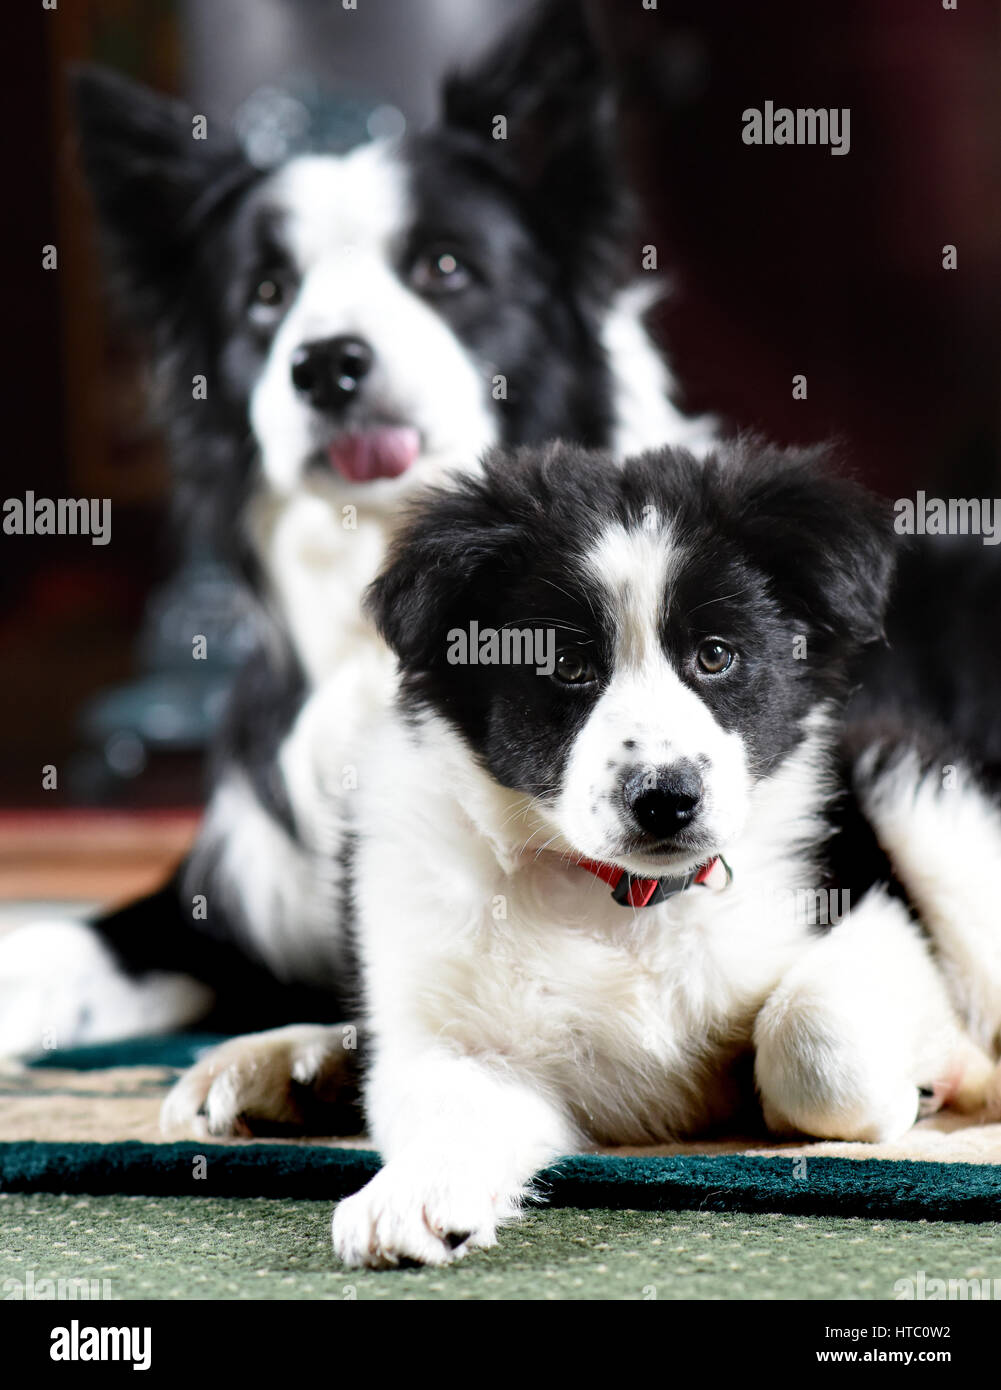 Cute border collie puppy dog dogs Stock Photo